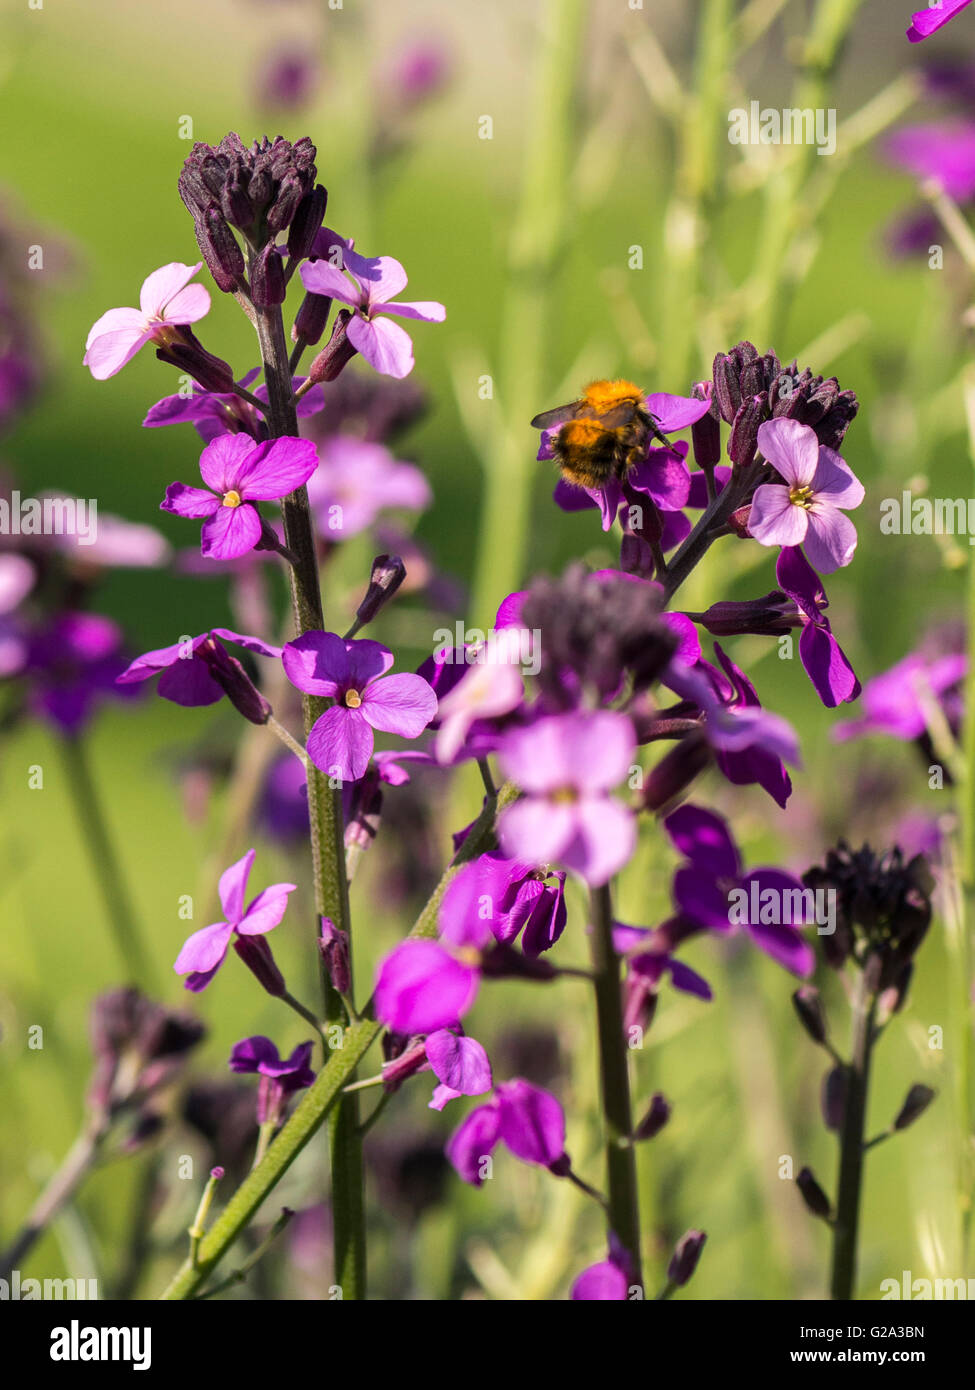 Spring Pollinator, Bumblebee (Bombus) collecting nectar from the vivid rosy purple bell shaped flowers of the Campion plant. Stock Photo